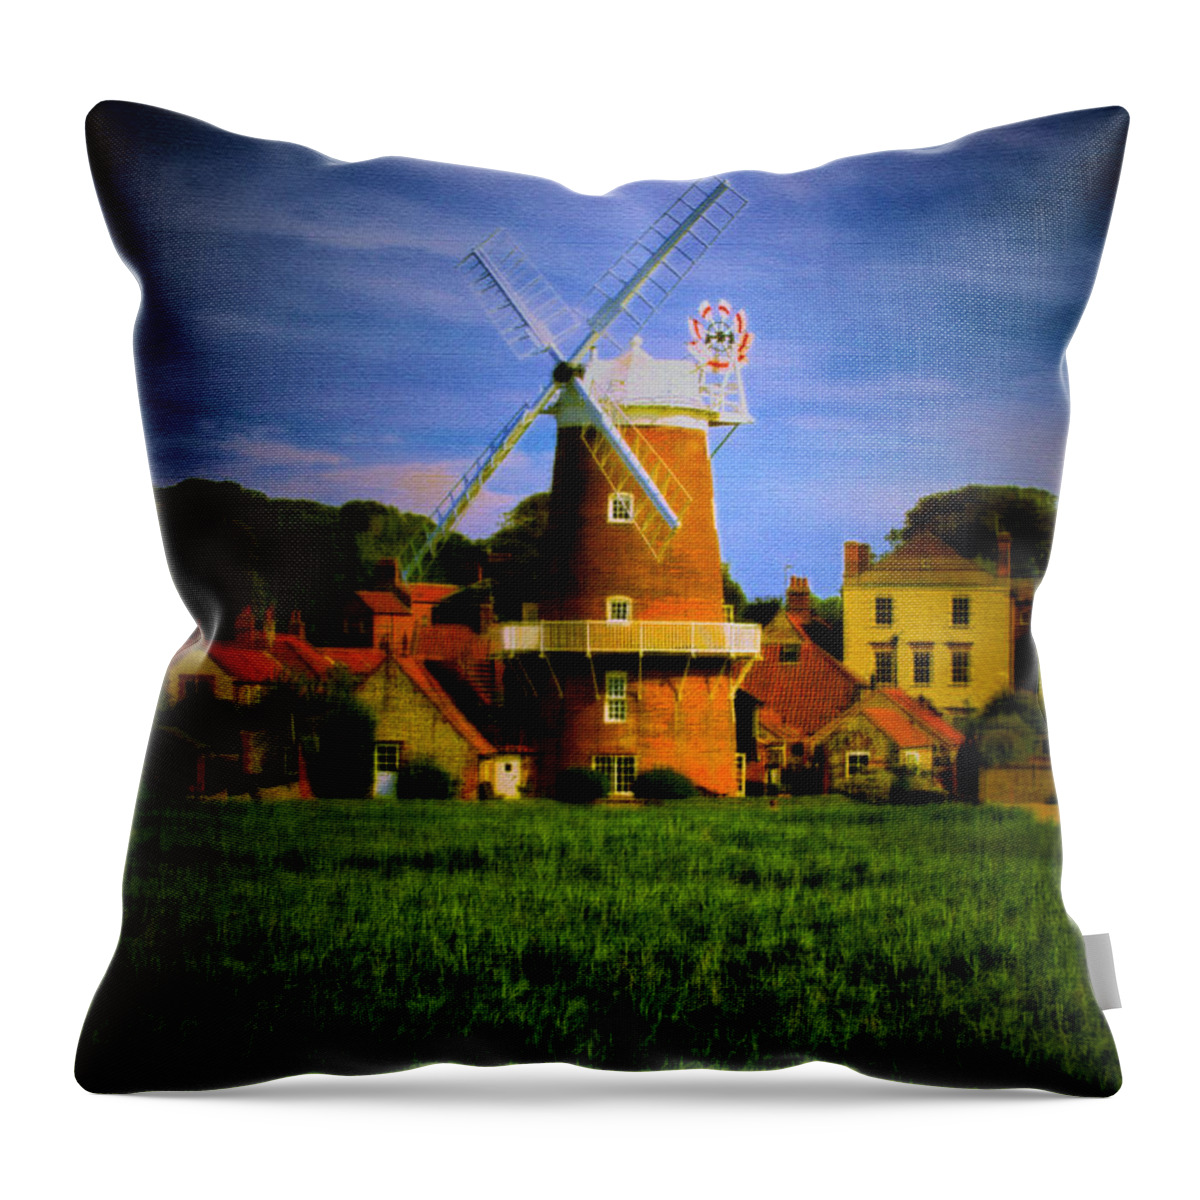 Landscapes Throw Pillow featuring the photograph Cley Mill Norfolk by Mark Egerton